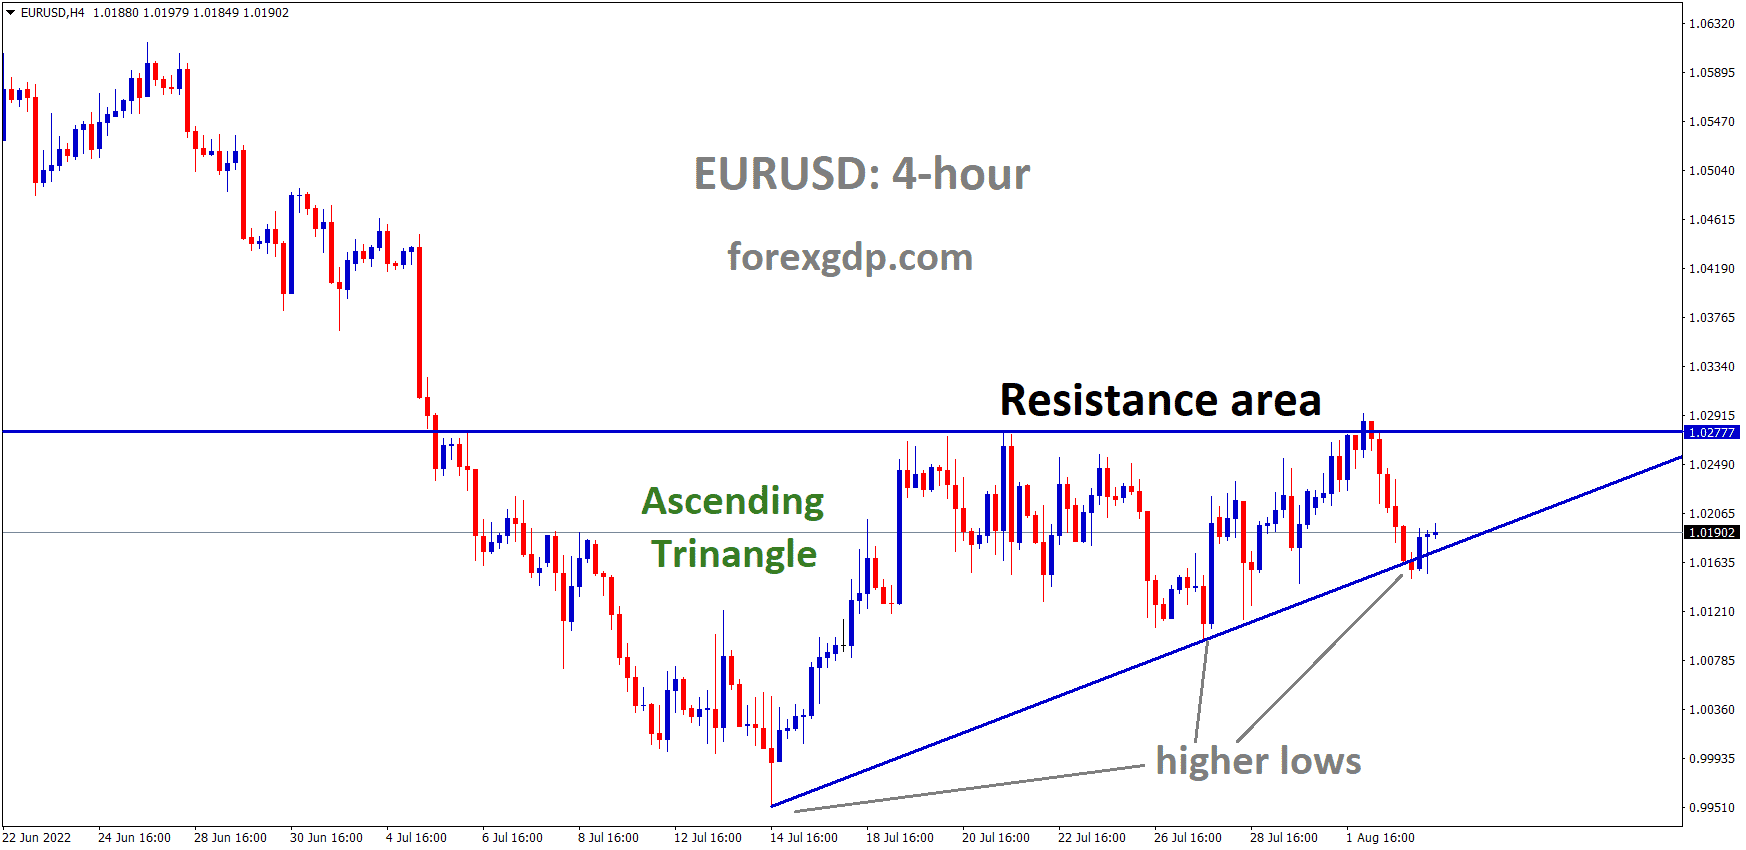 EURUSD is moving in an Ascending triangle pattern and the Market has rebounded from the Higher Low area of the Triangle pattern